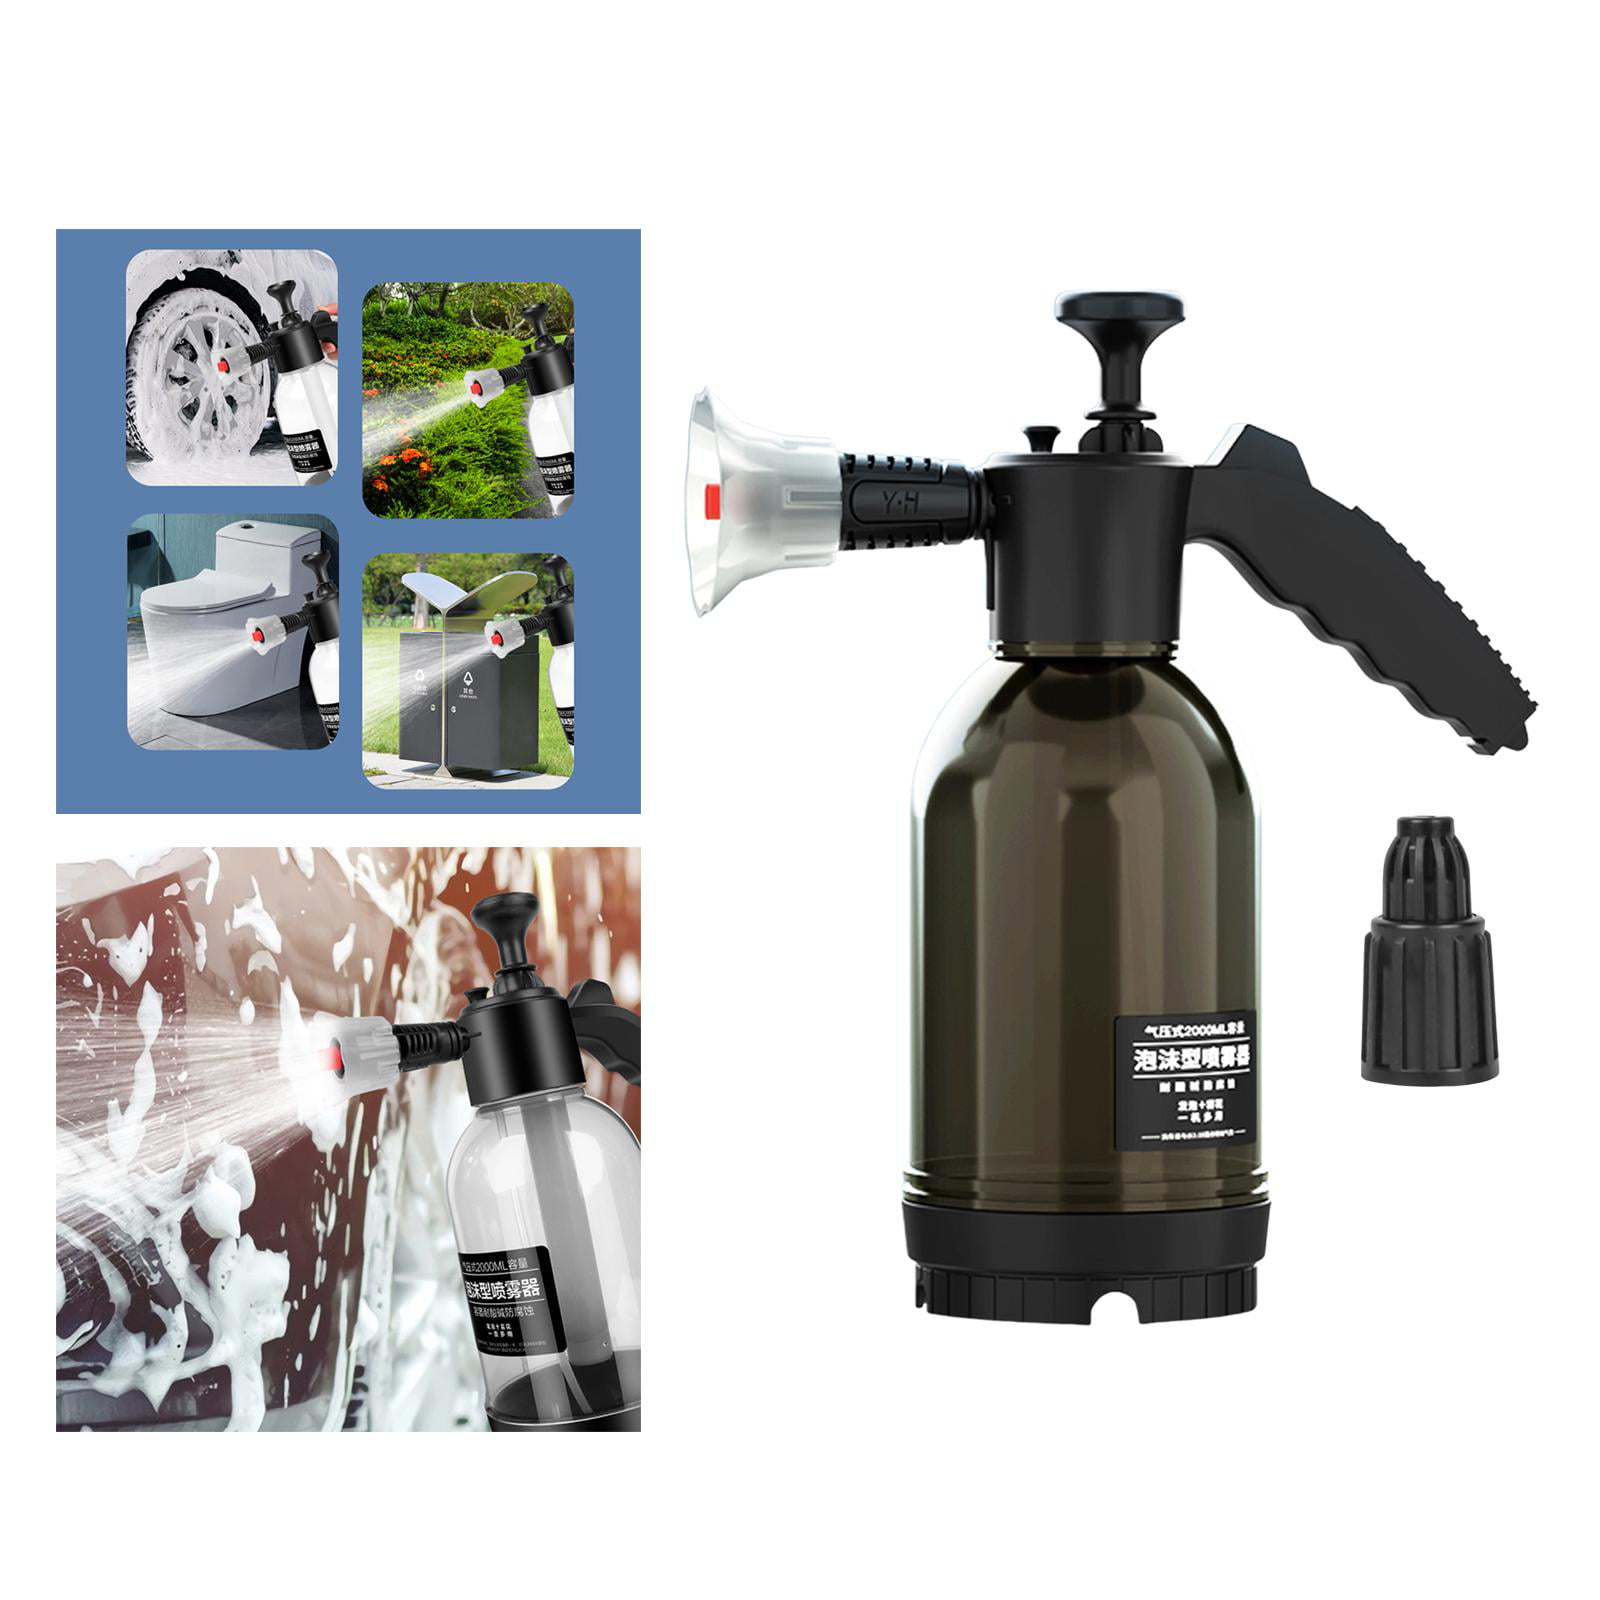 2L Hand Pump Foam Bunnings Pressure Sprayer For Efficient Car And